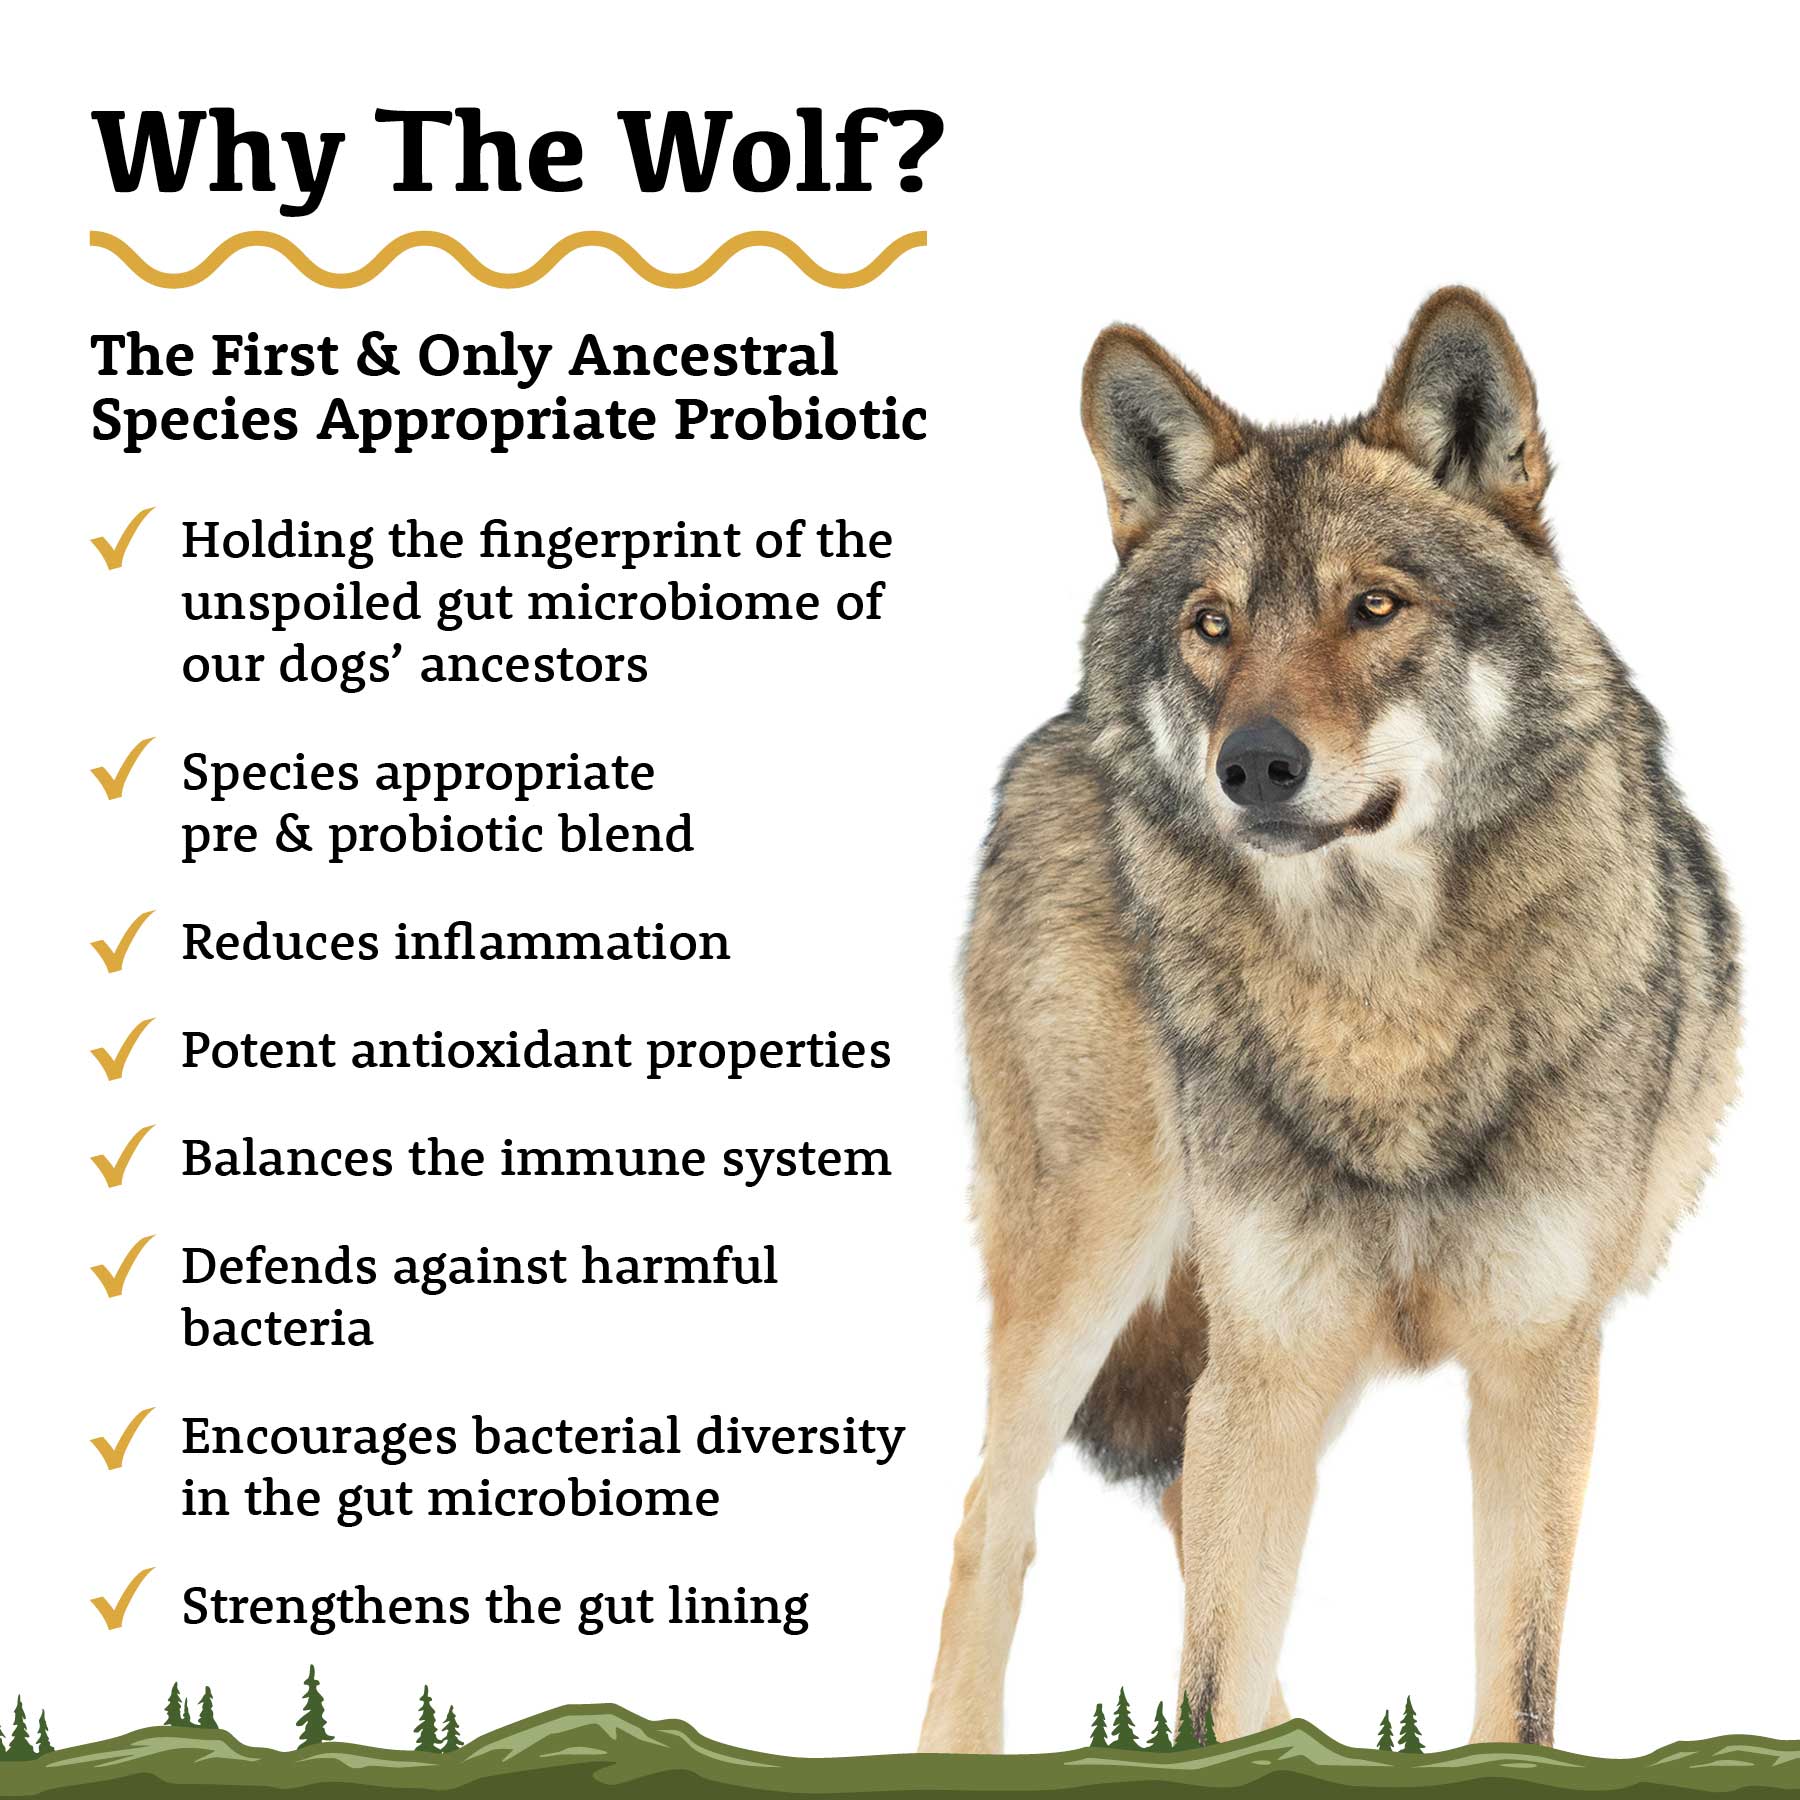 The Wolf | Species Appropriate Probiotic